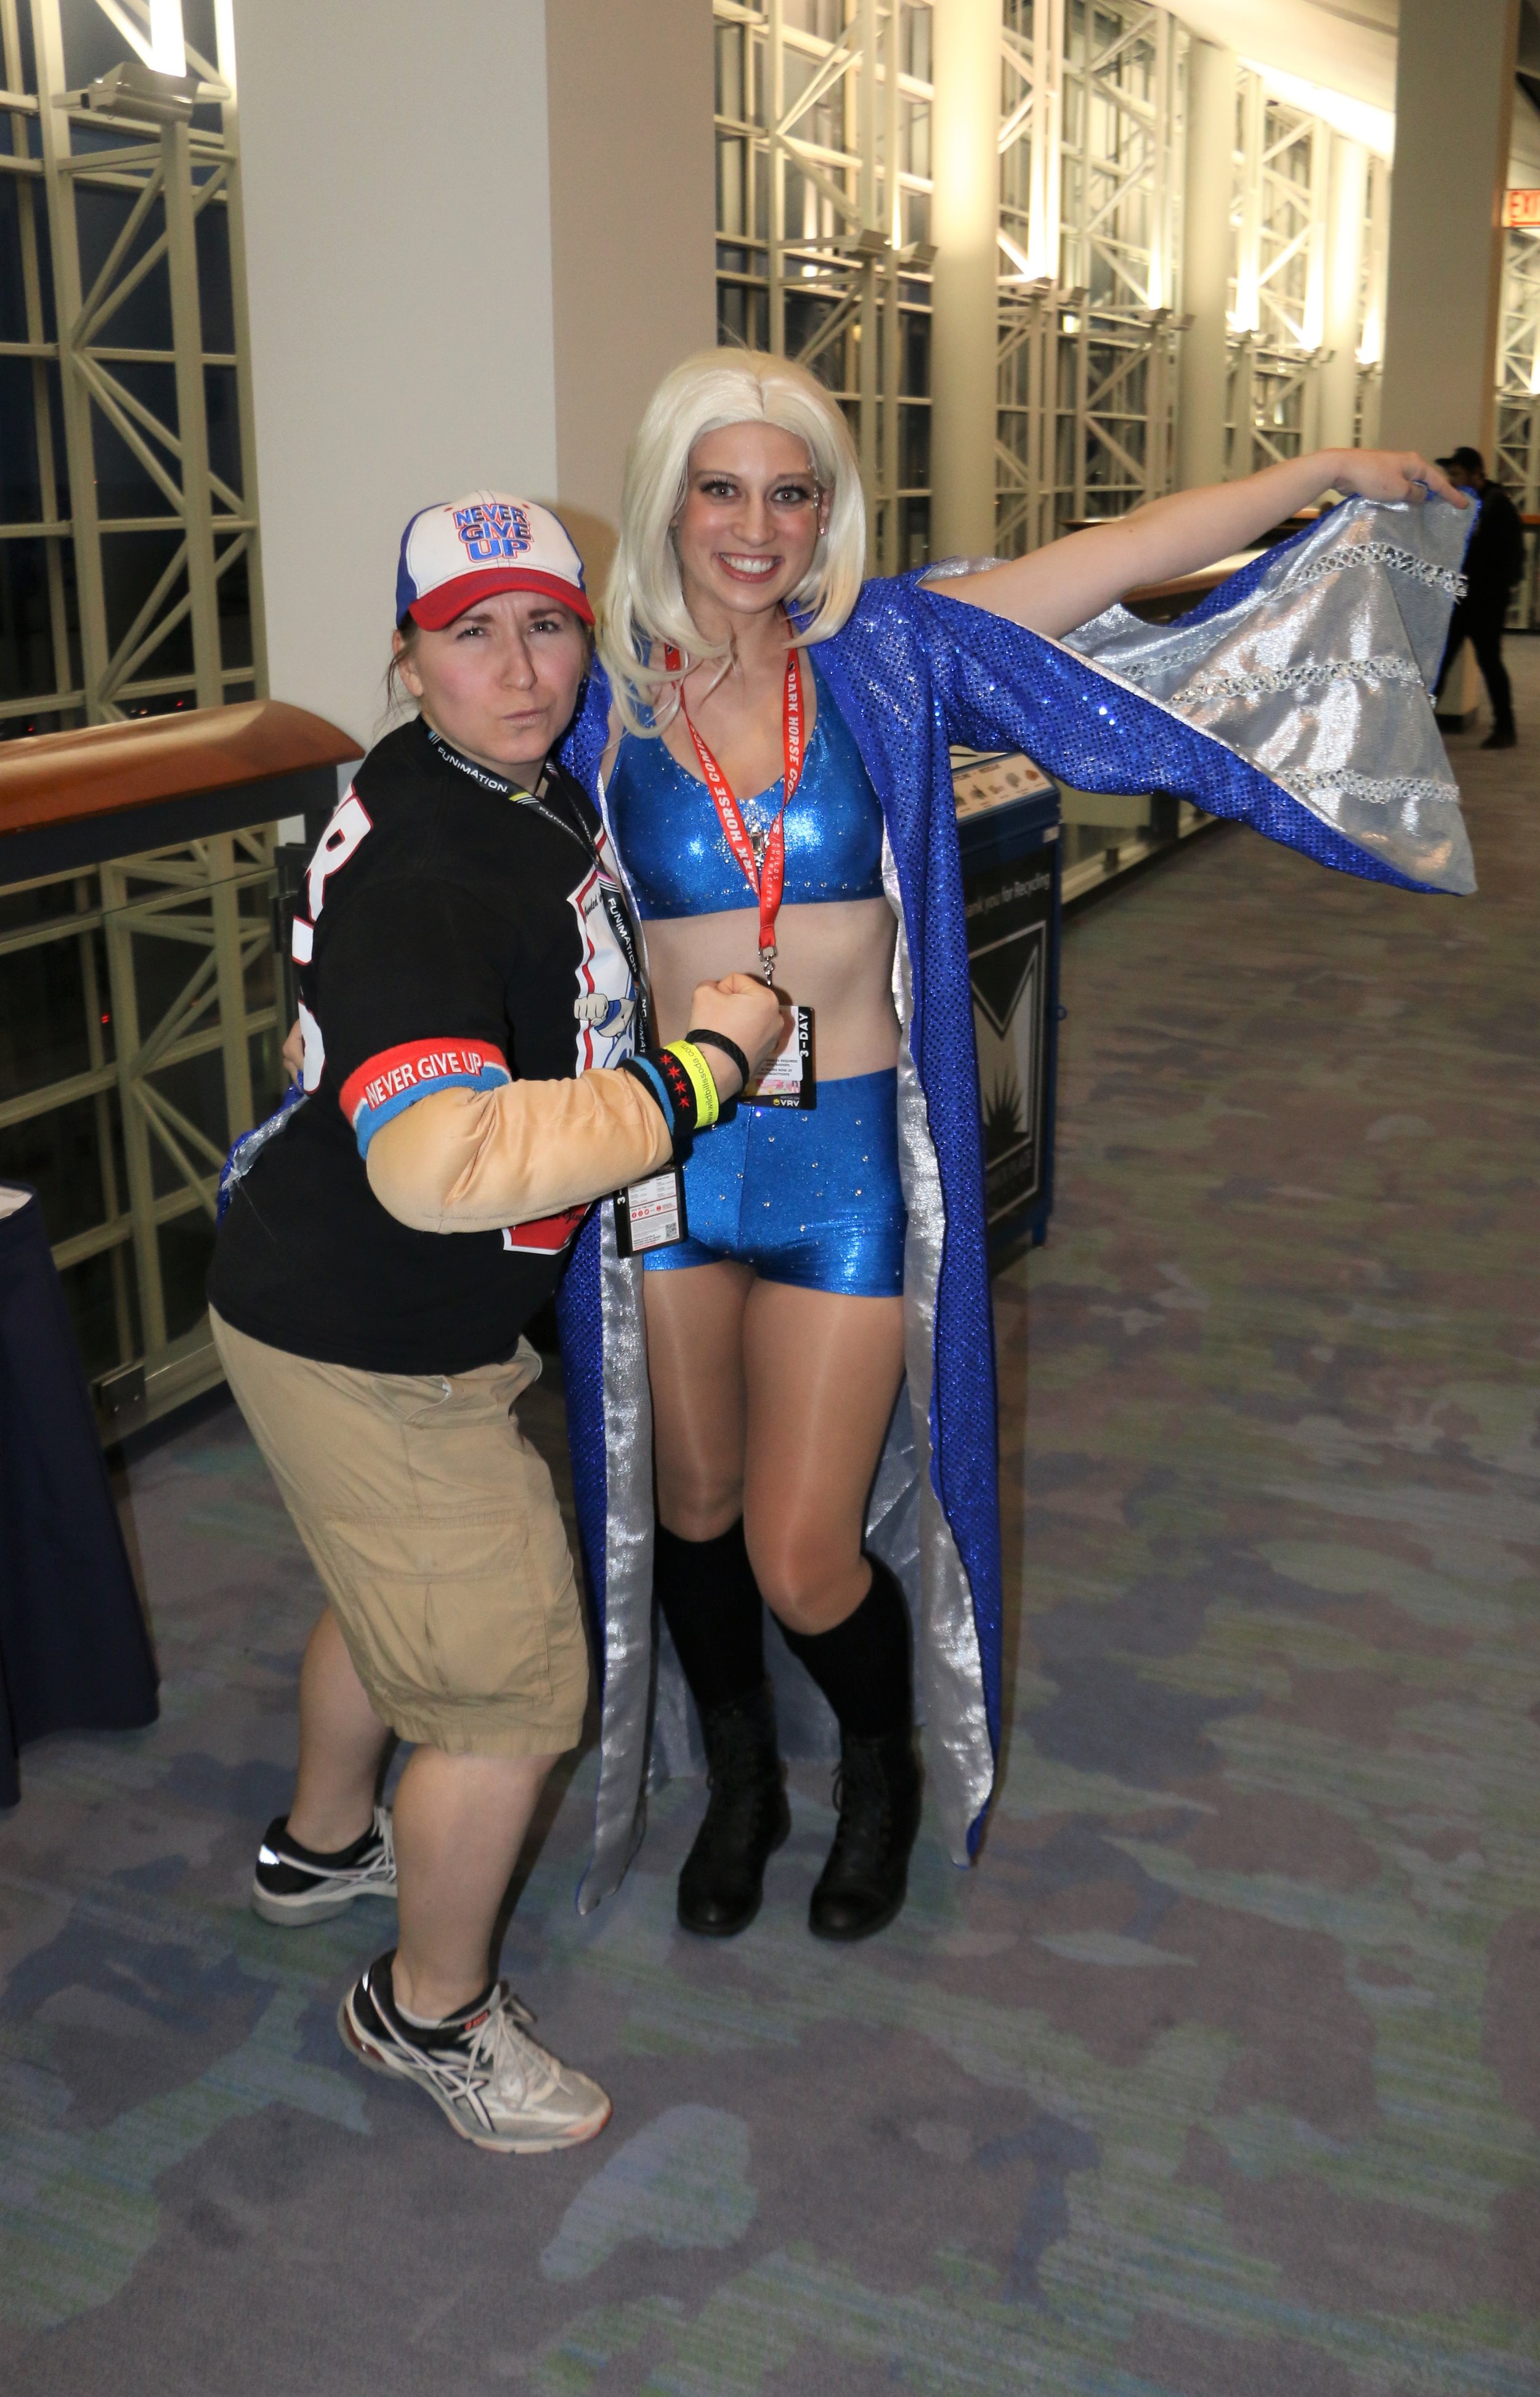  Awesome John Cena and Charlotte Flair cosplayers. 